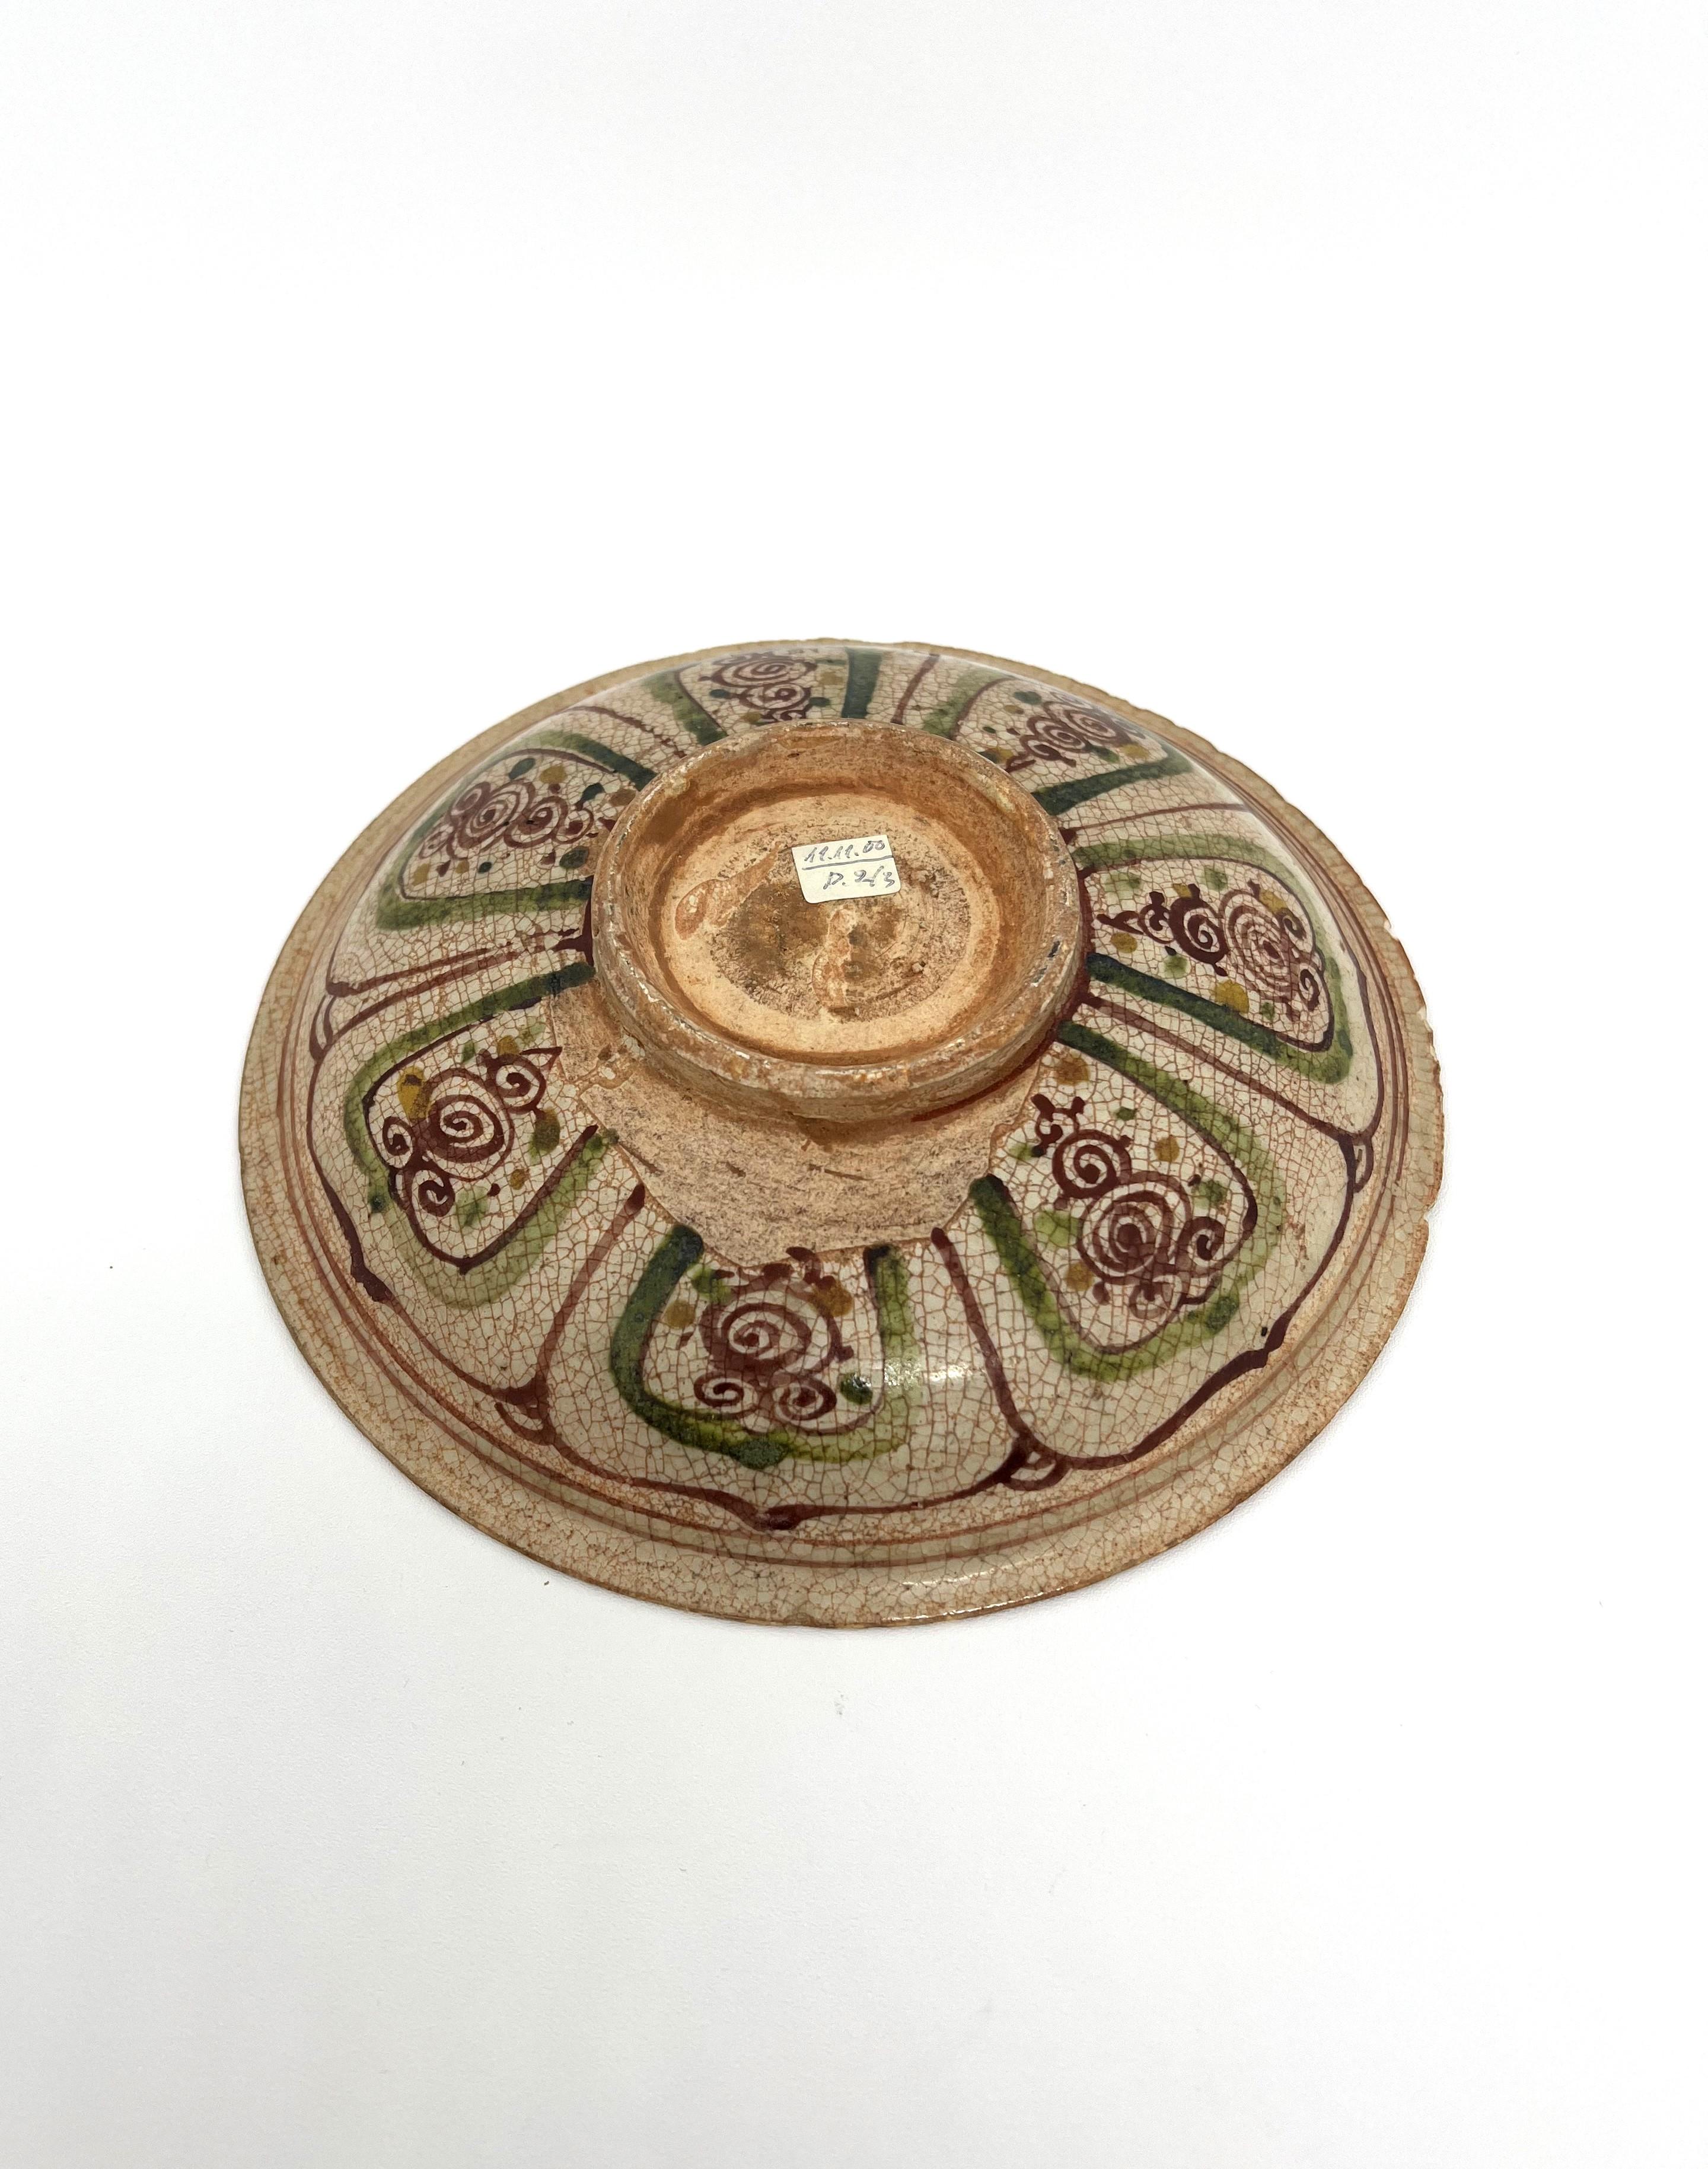 Stoneware decorated with Persian-style colors and patterns, and it is highly likely that this Annamese pottery intended for export was produced to meet Middle Eastern demand.

Dates : 15th century Le Dynasty
Region : North Annam
Type : Stoneware